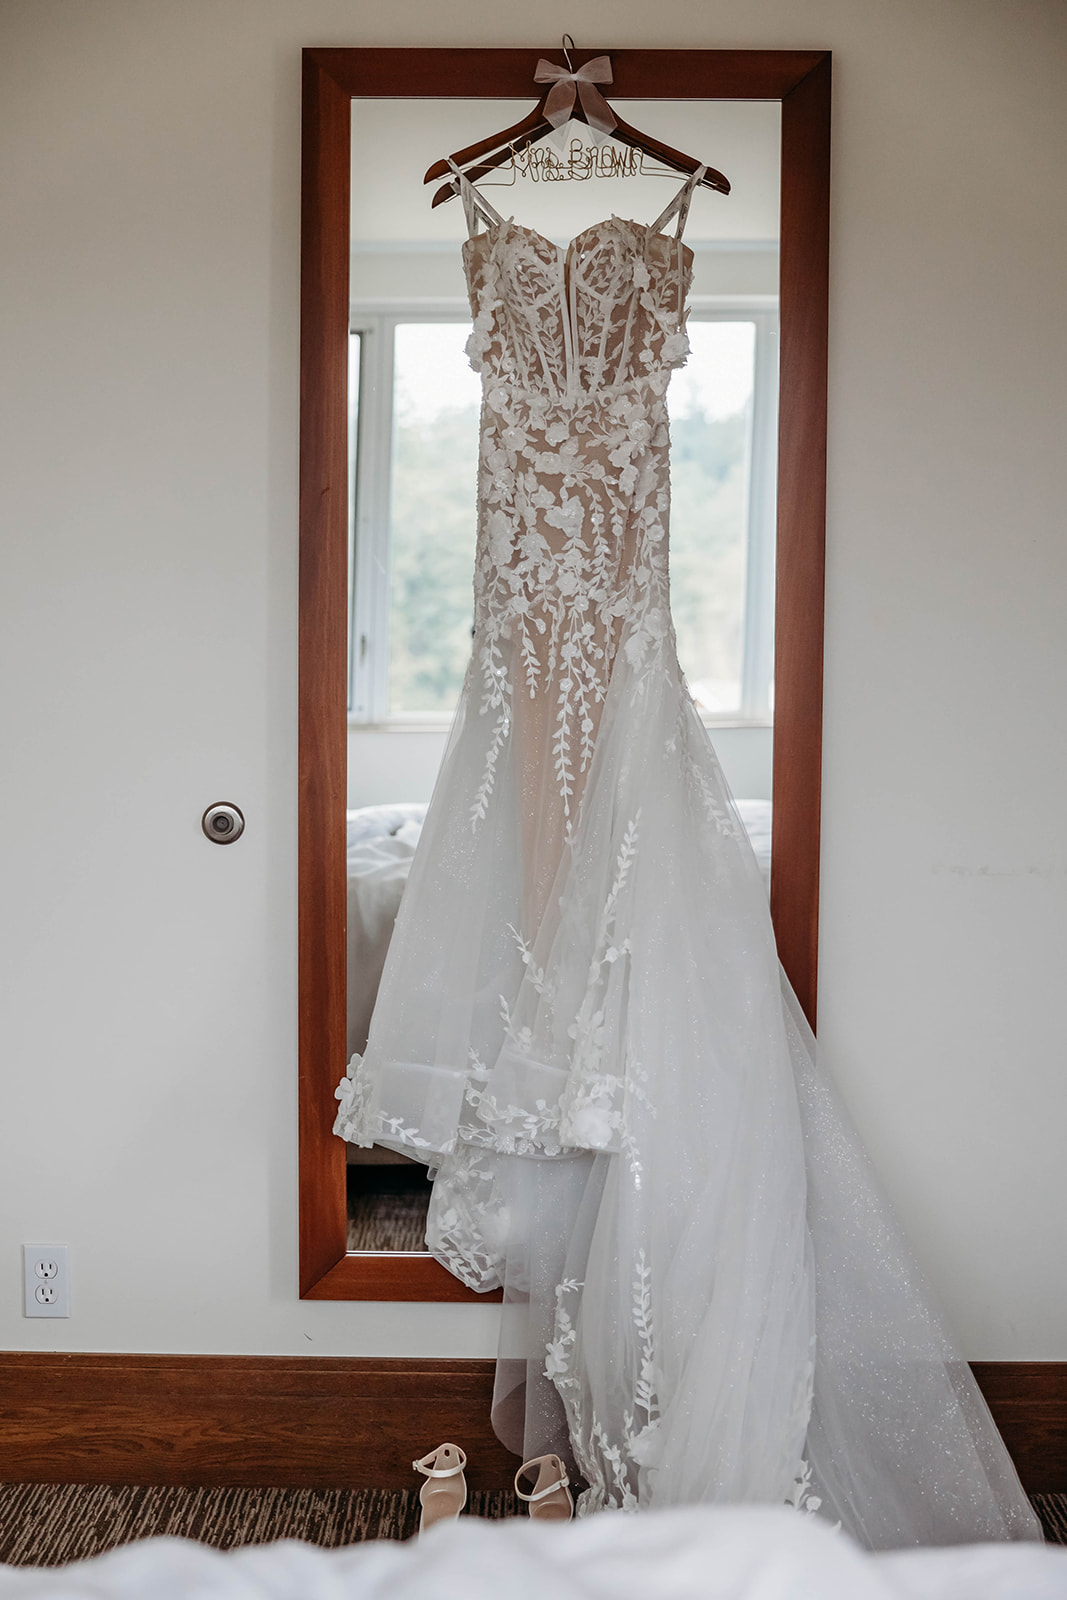 Dress details at the Clearwater Resort in Poulsbo, Washington